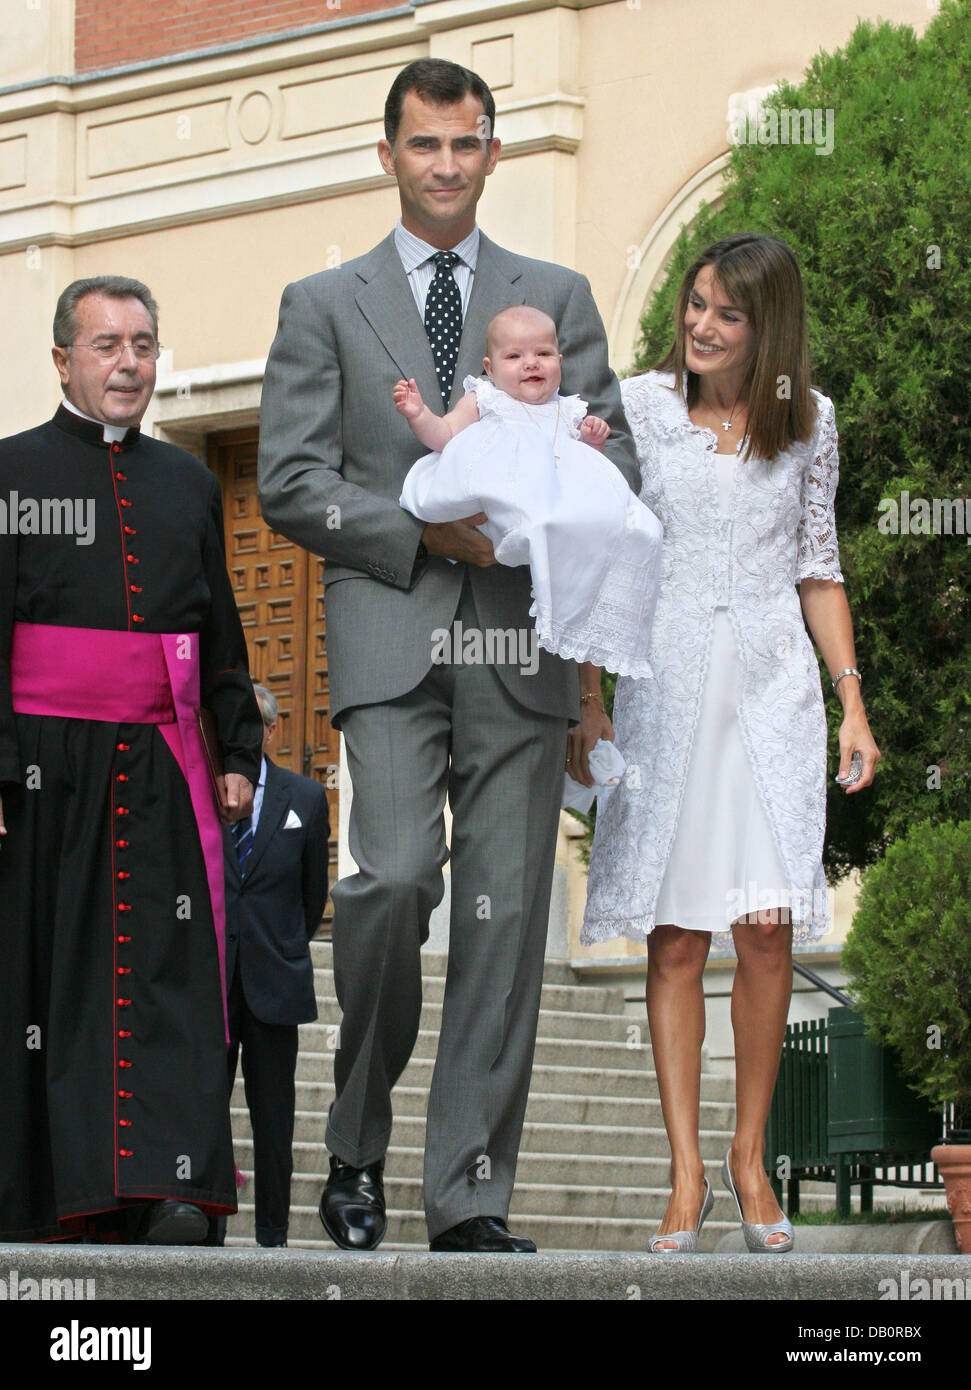 Spanish Crown Prince Felipe de Borbon (2-L) and his wife Princess Letizia pose with their second daughter Princess Sofia after a ceremony celebrated at the Atocha Basilica to ask the Virgin of Atocha for protection of the Royal Family's new member in Madrid, Spain, 19 September 2007. Photo: Albert Nieboer NETHERLANDS OUT Stock Photo